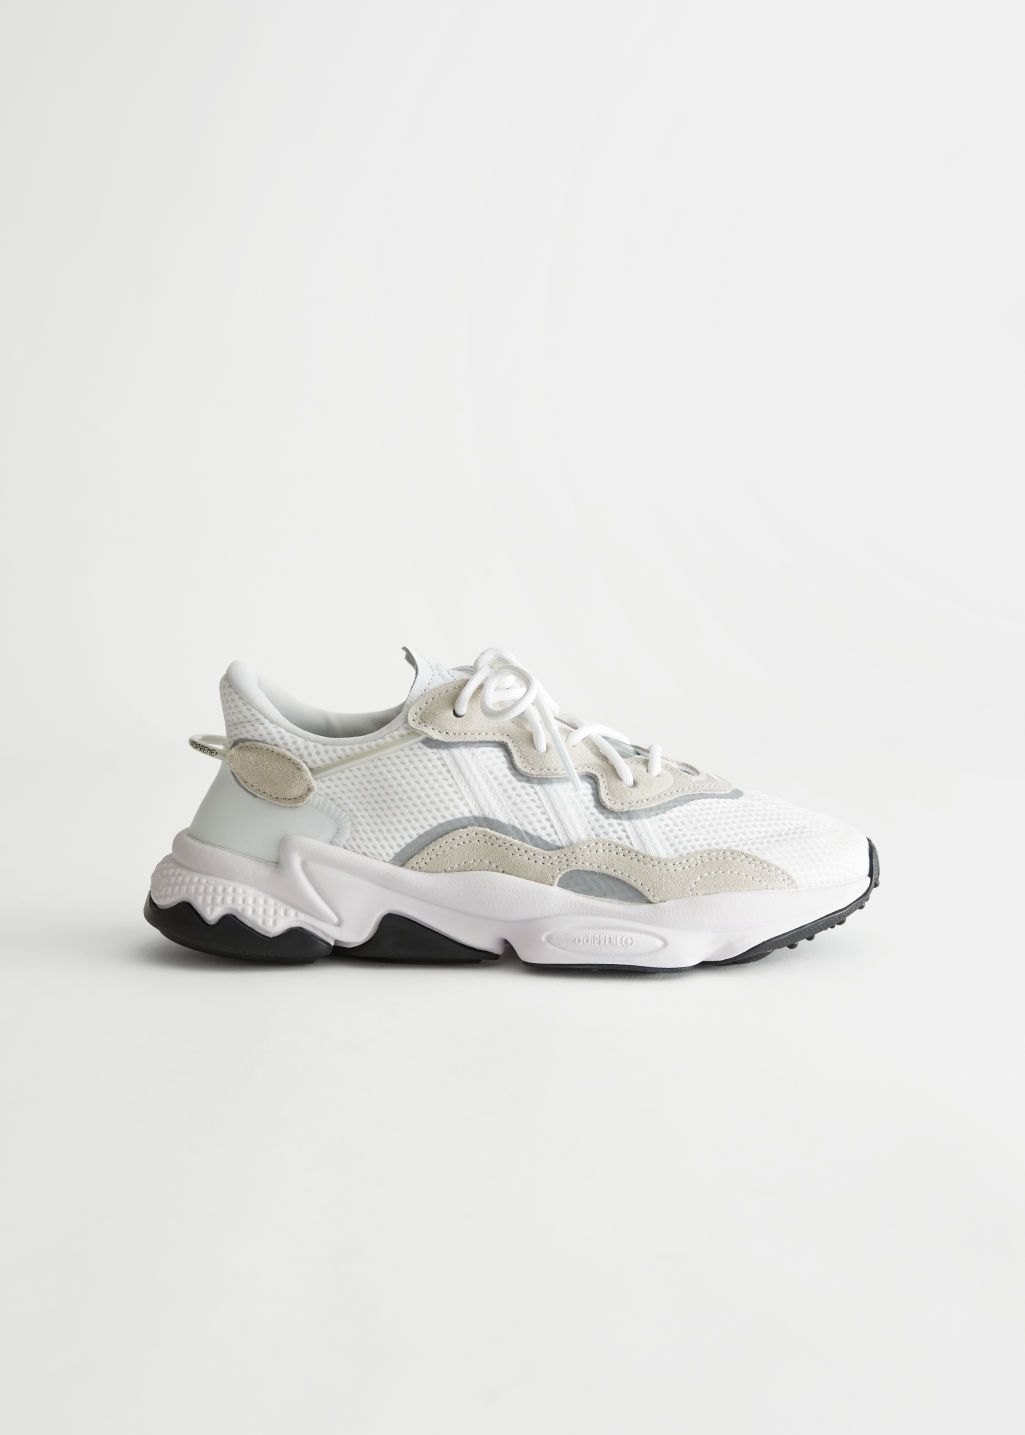 adidas Ozweego - White, Grey - Adidas - & Other Stories - Click Image to Close